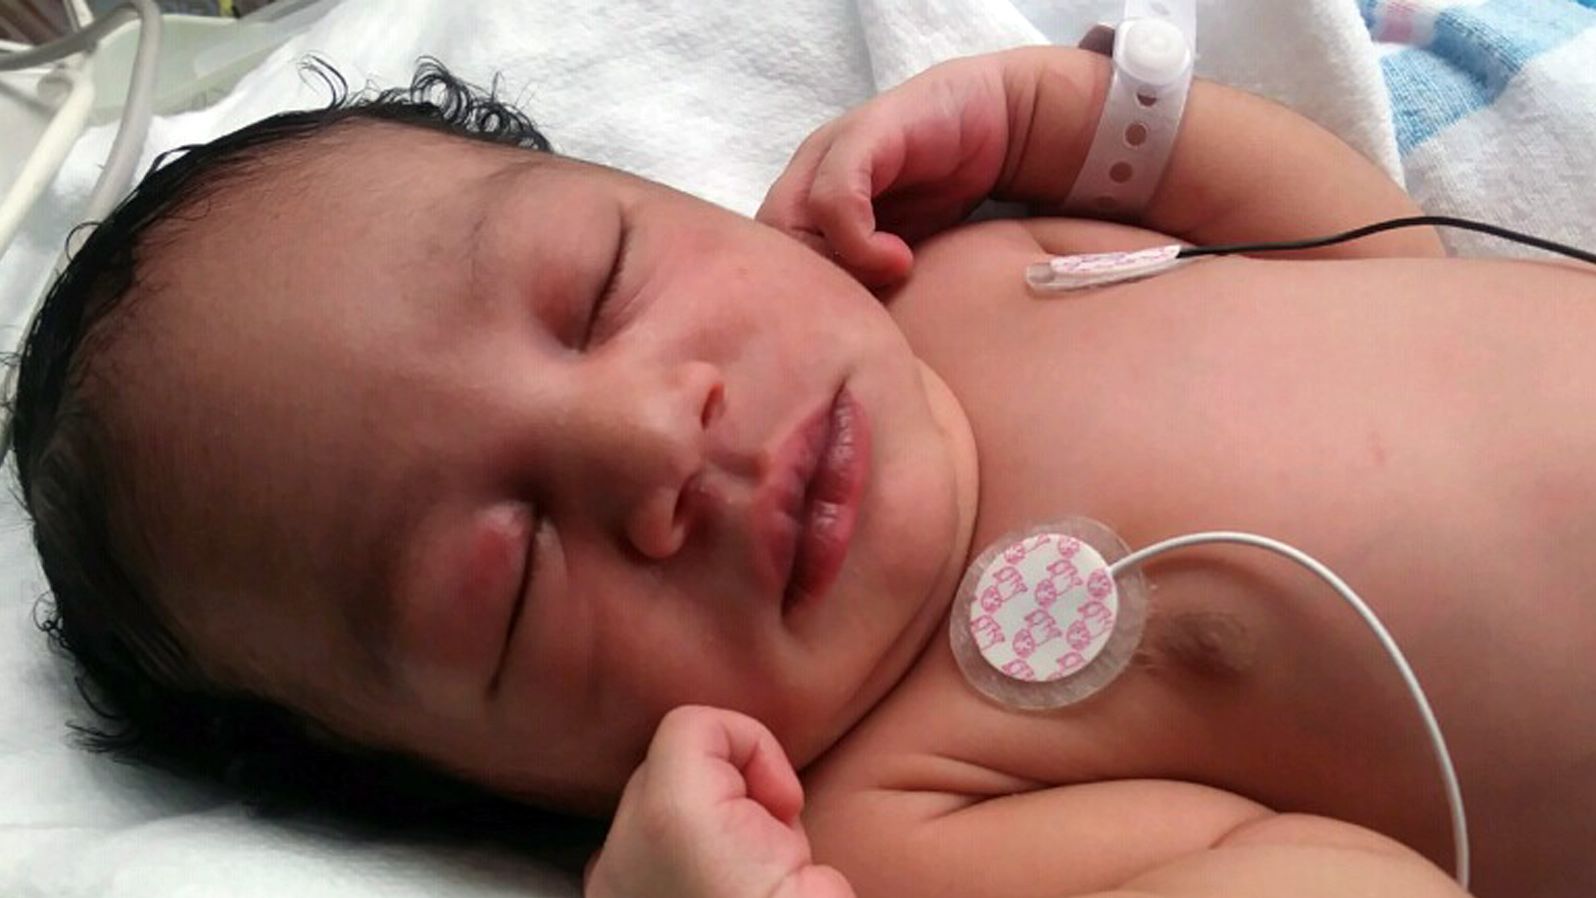 Destiny Knight was born at home during Hurricane Irma, weighing 6 lbs 11 oz.